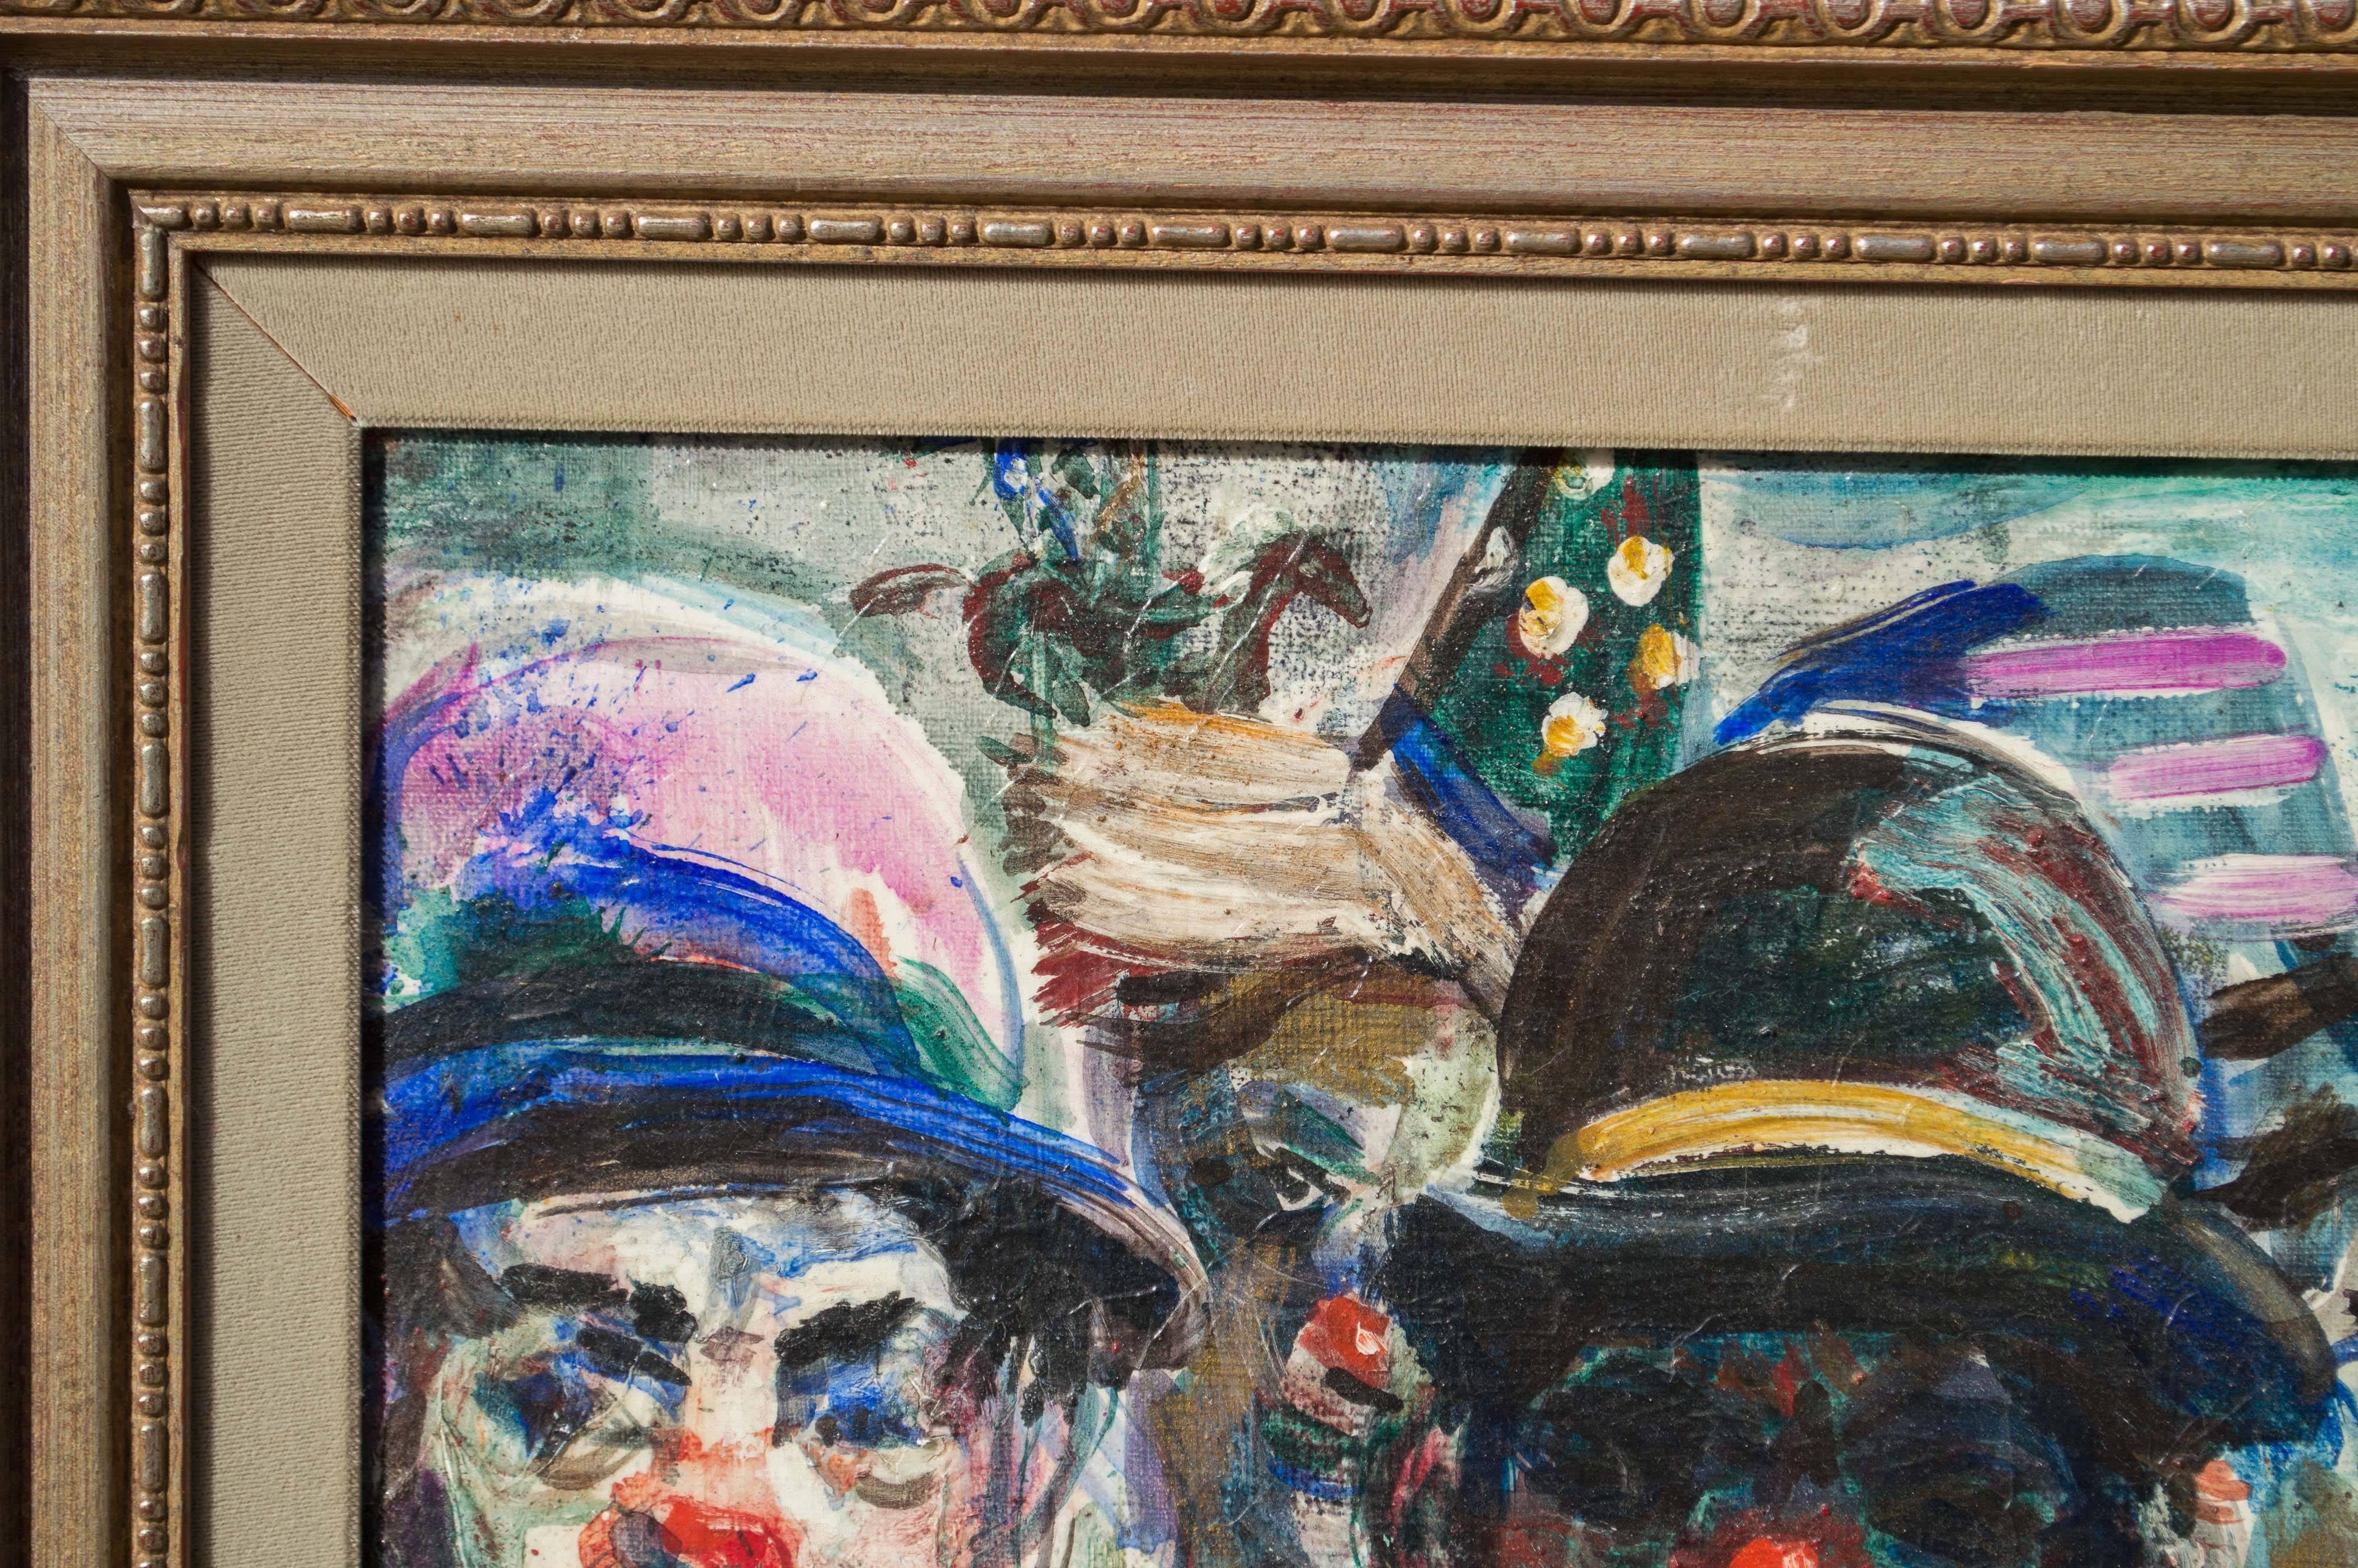 Hand-Painted Study of Circus Clowns, Oil on Canvas, by Pat Cucaro, circa 1973